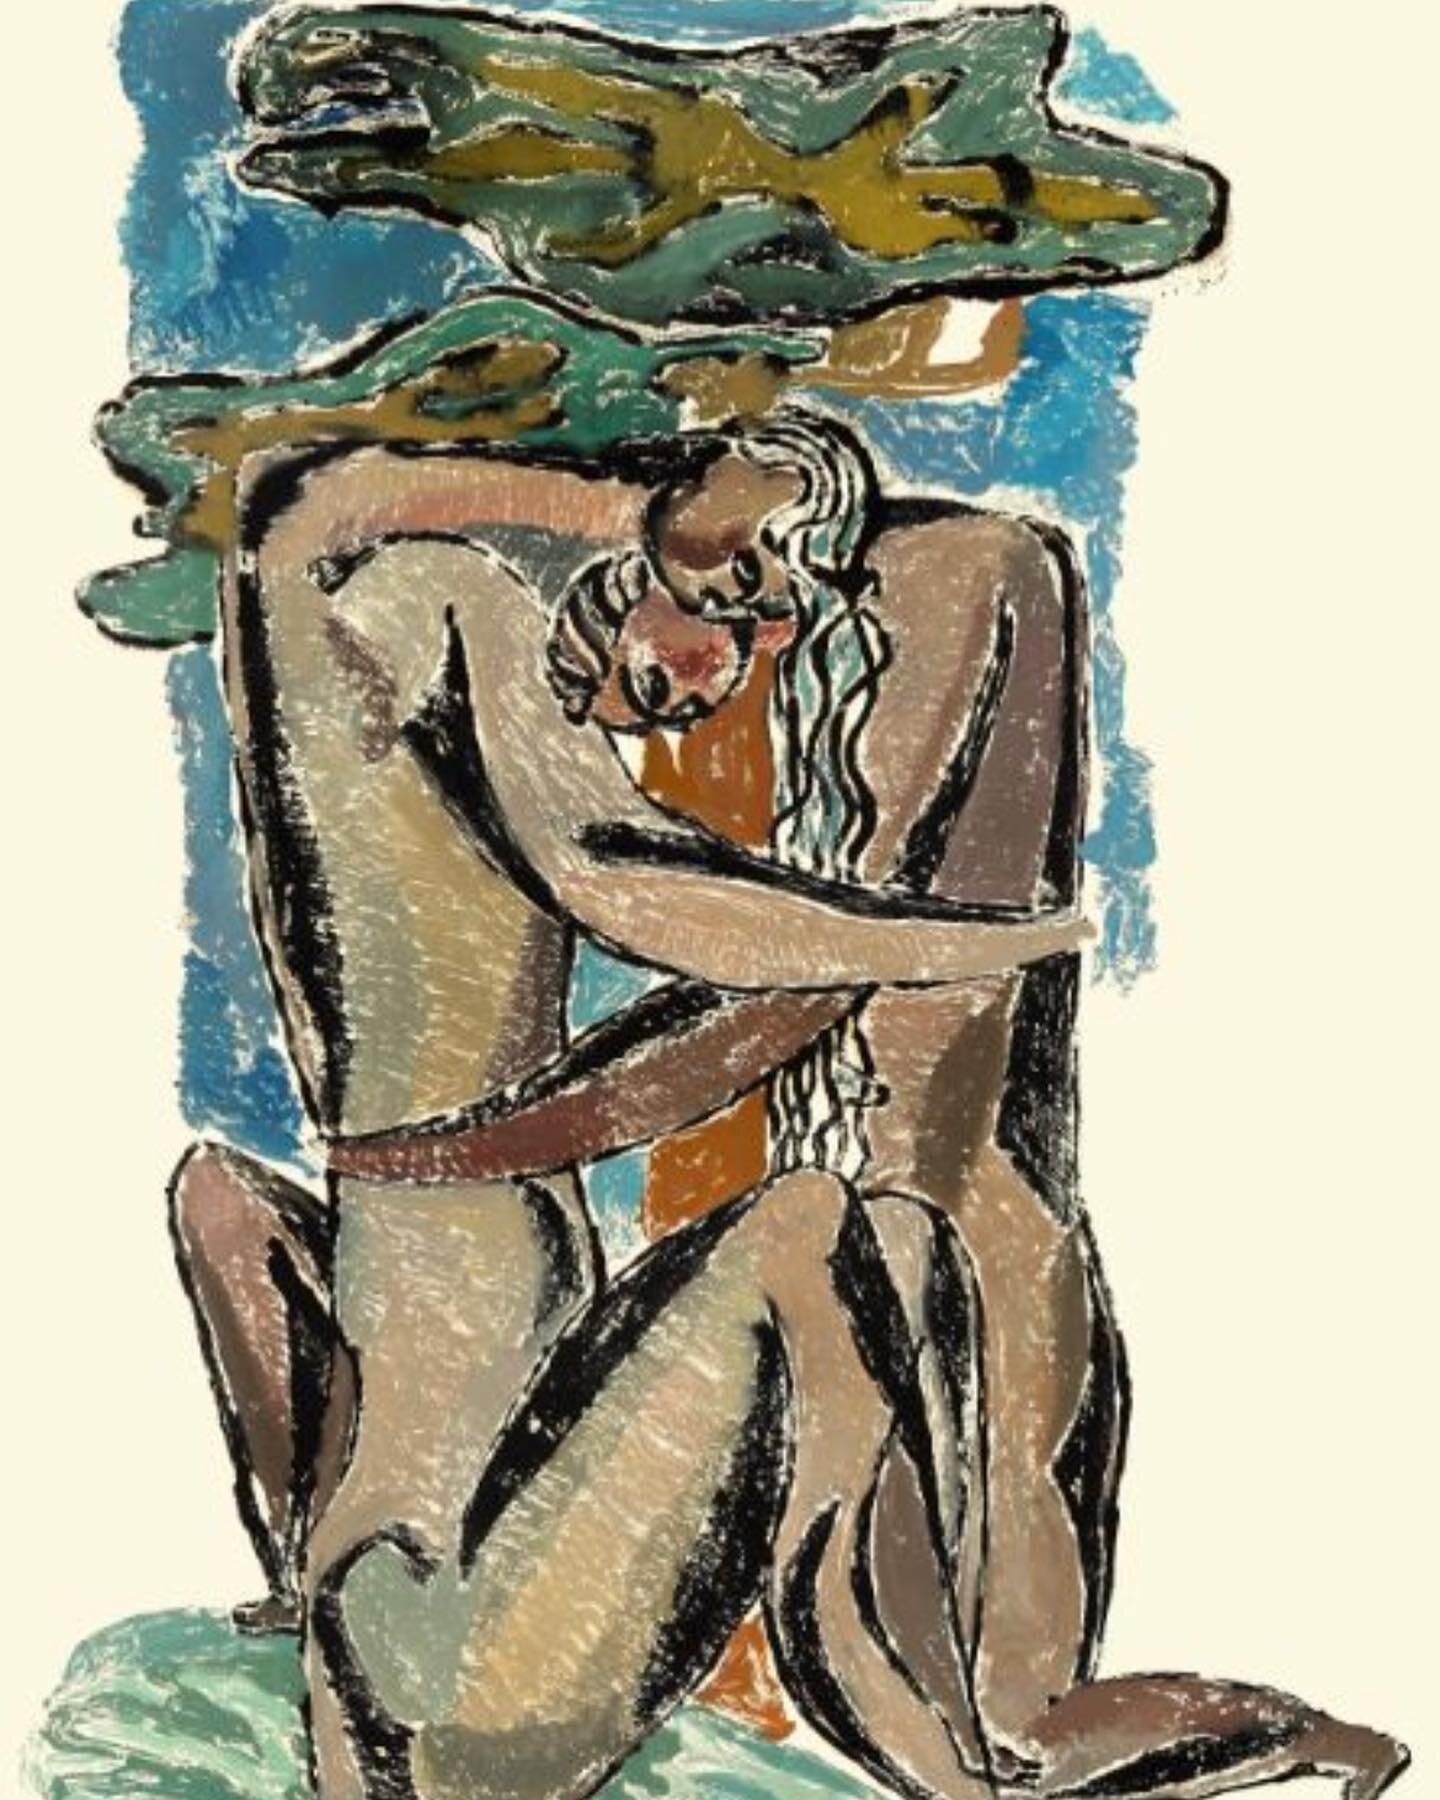 Lovers - Color monotyping 100 x 70 (1974) by Walter Friedrich

#painting #painter #drawing #walterfriedrich #artgallery #colorphotography #artgallery #handmade #instaart #potd #lovers #love